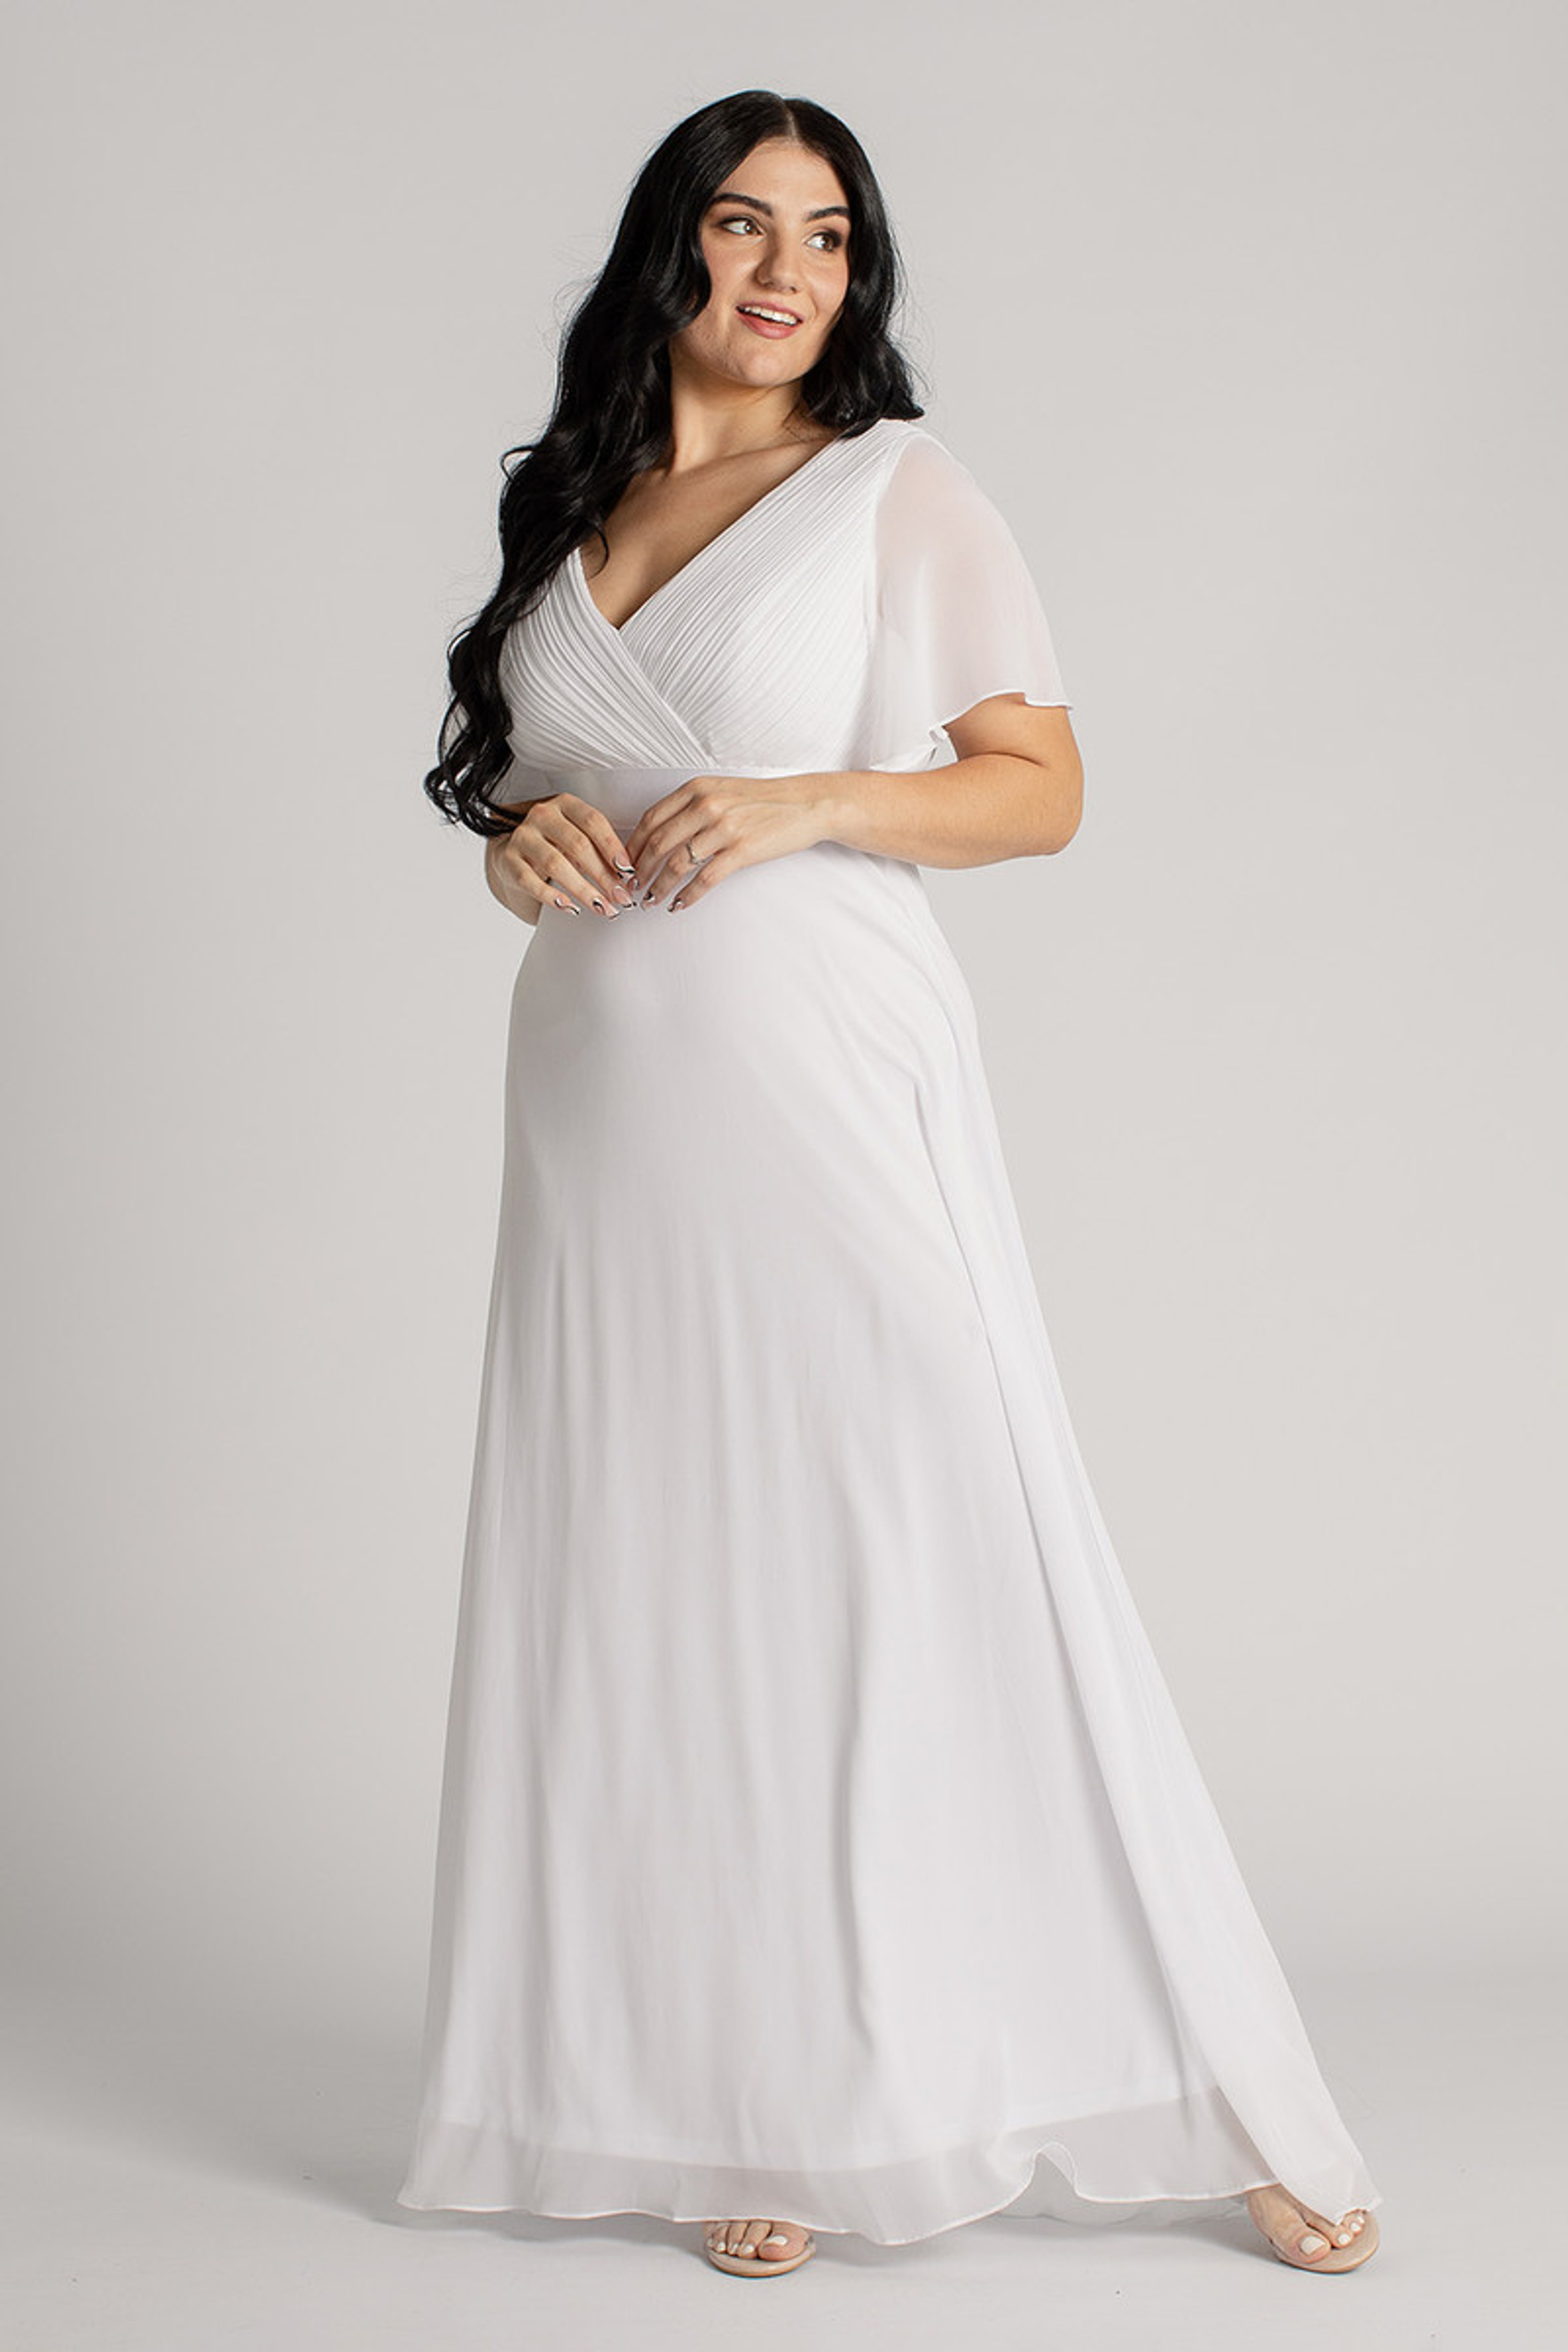 Evelyn Chiffon Short Sleeved Bridesmaid Dress in White